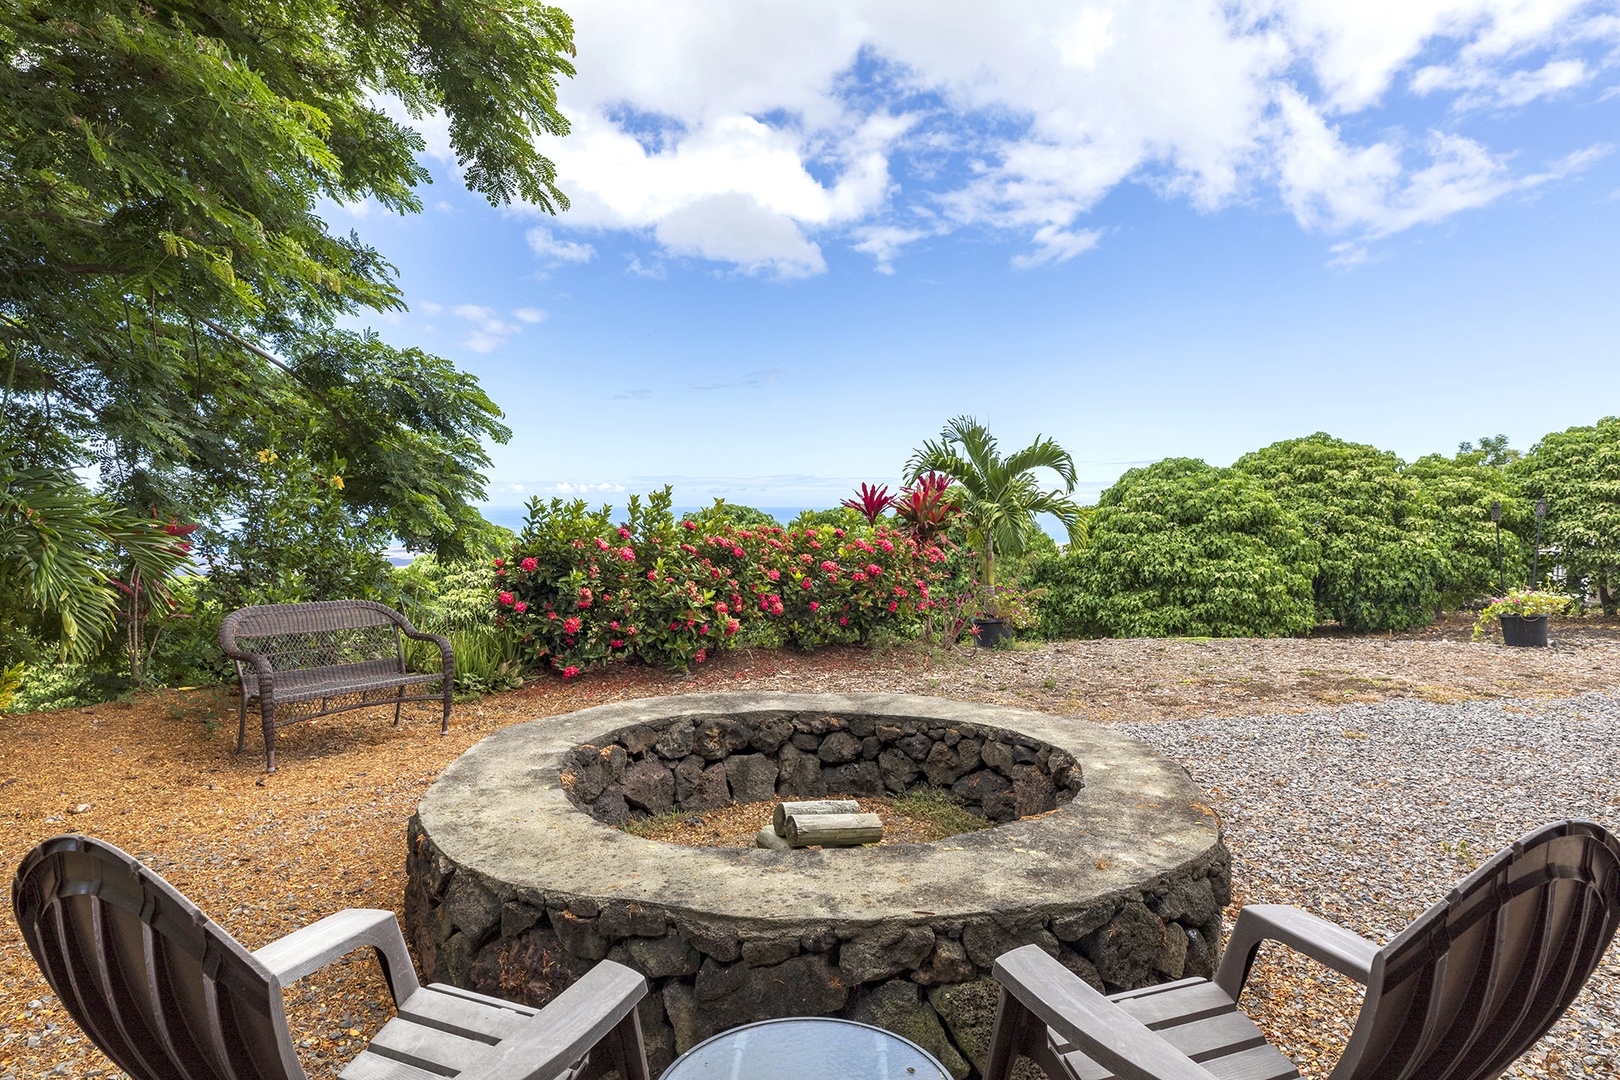 Firepit and outdoor seating